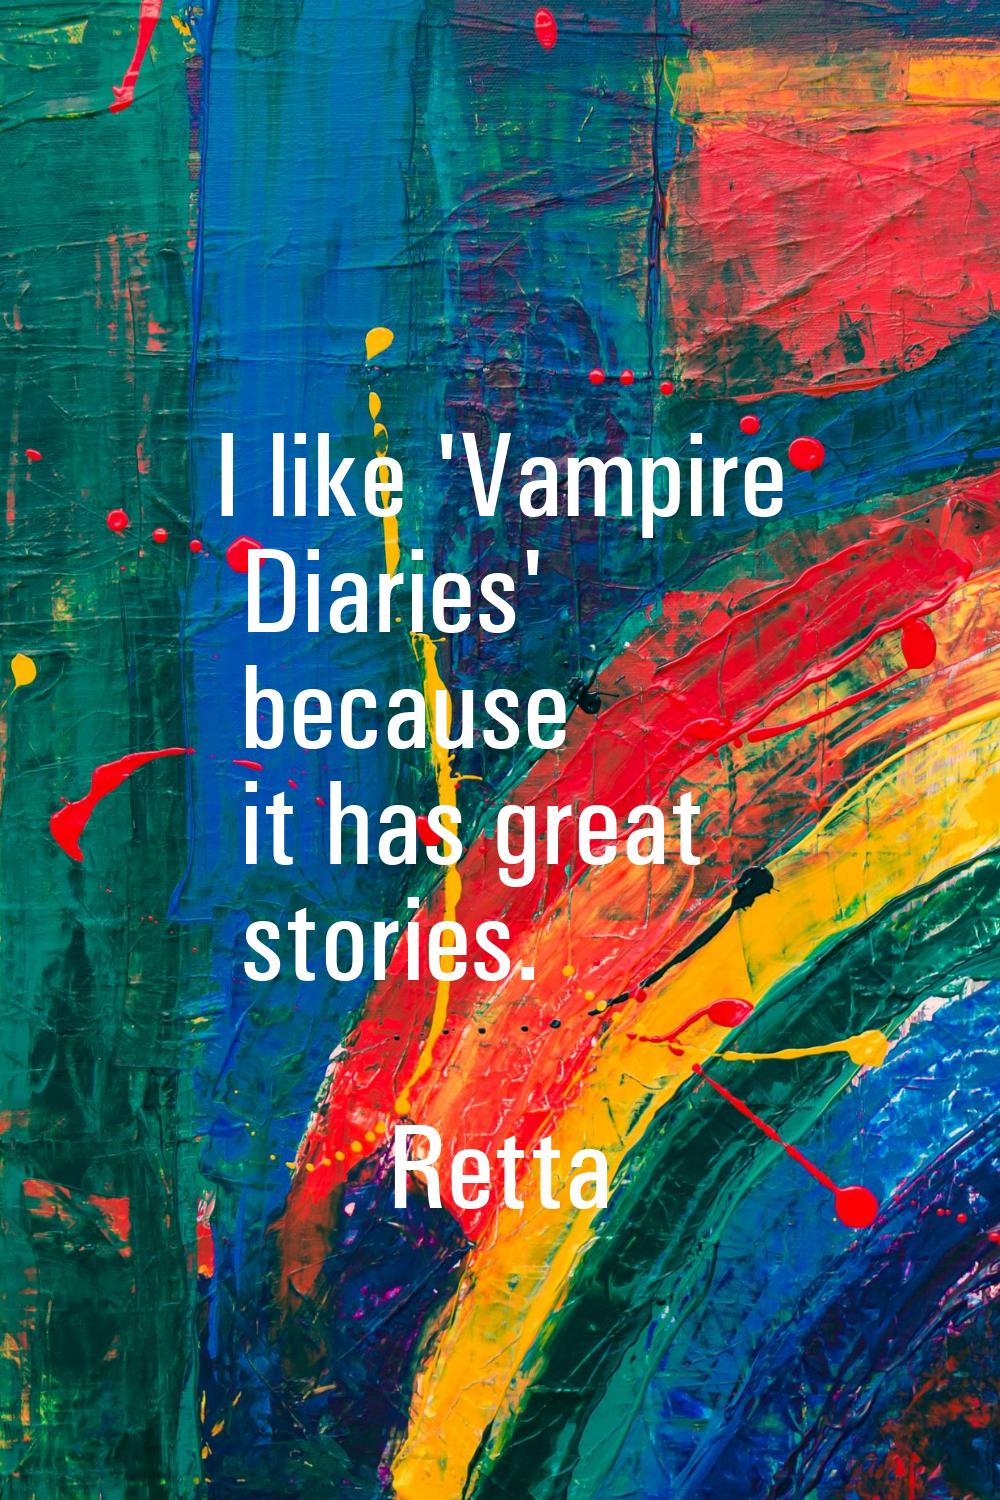 I like 'Vampire Diaries' because it has great stories.